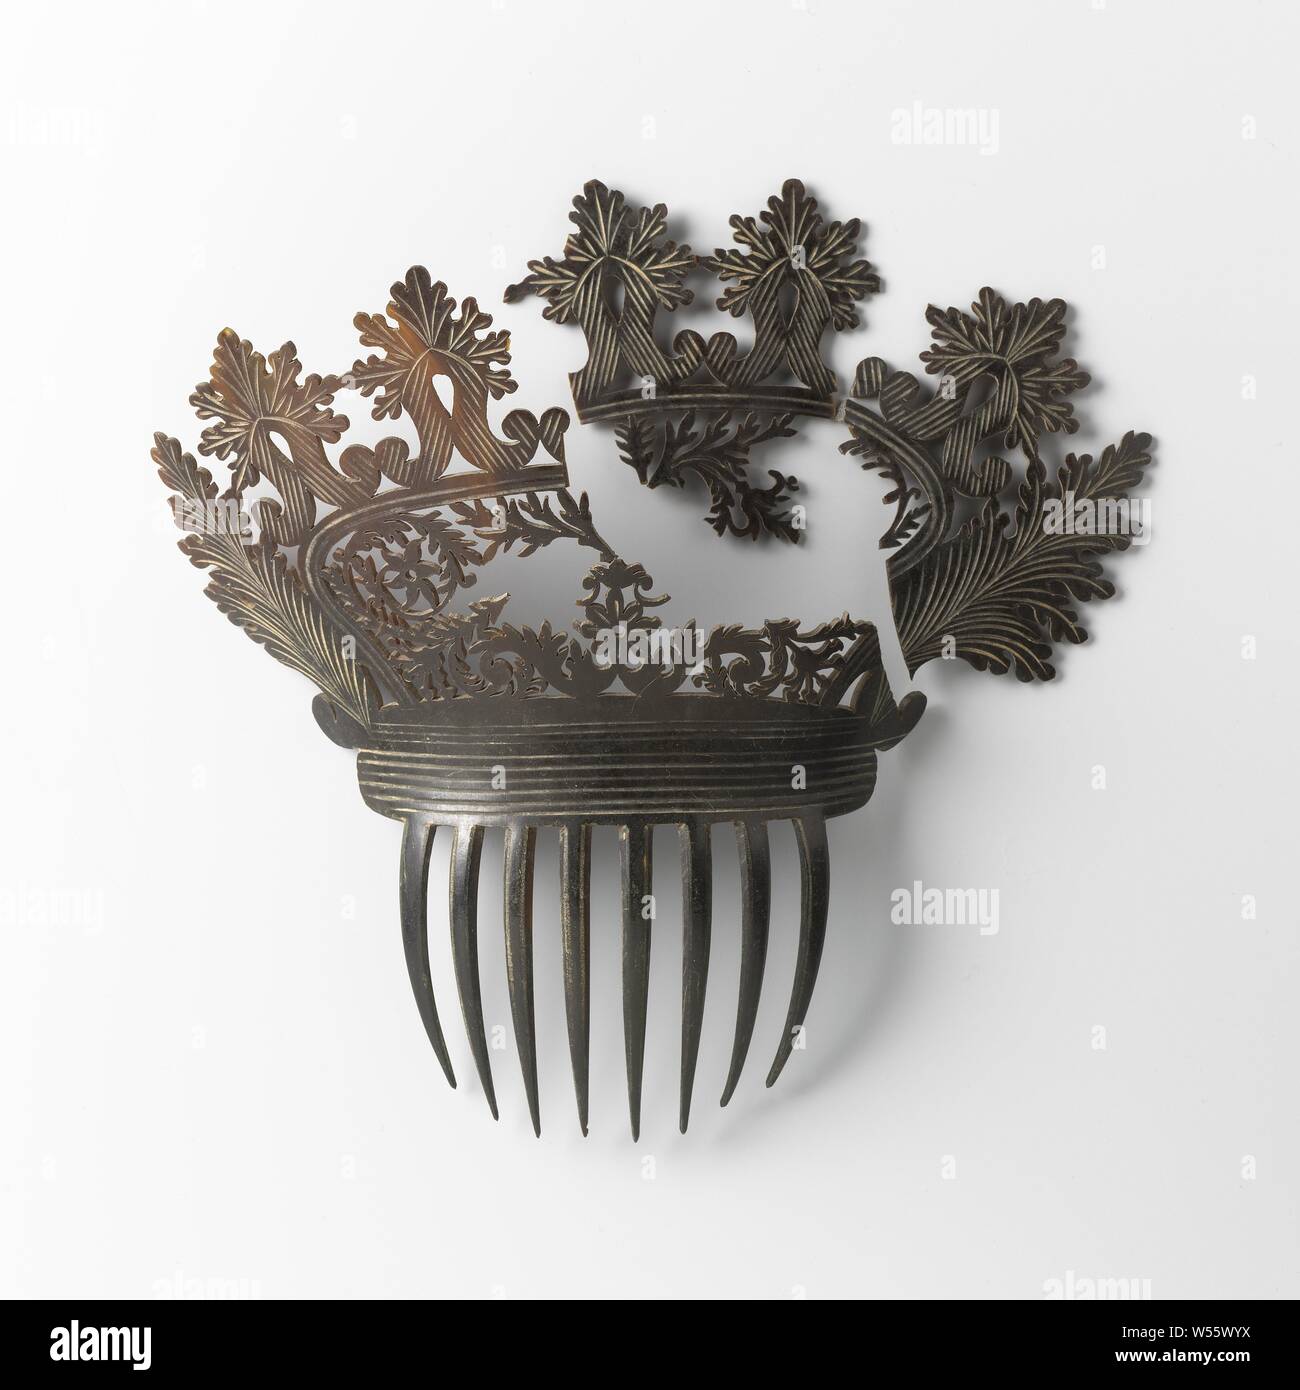 Hair comb of tortoise and horn with richly cut back, eight teeth, Hair comb of tortoise and horn with high standing richly cut back, leaf and flower vines, crowned with festoons. Eight teeth., anonymous, Netherlands, c. 1800 - c. 1830, horn (animal material), polishing, h 19.5 cm × w 13 cm × d 8 cm Stock Photo